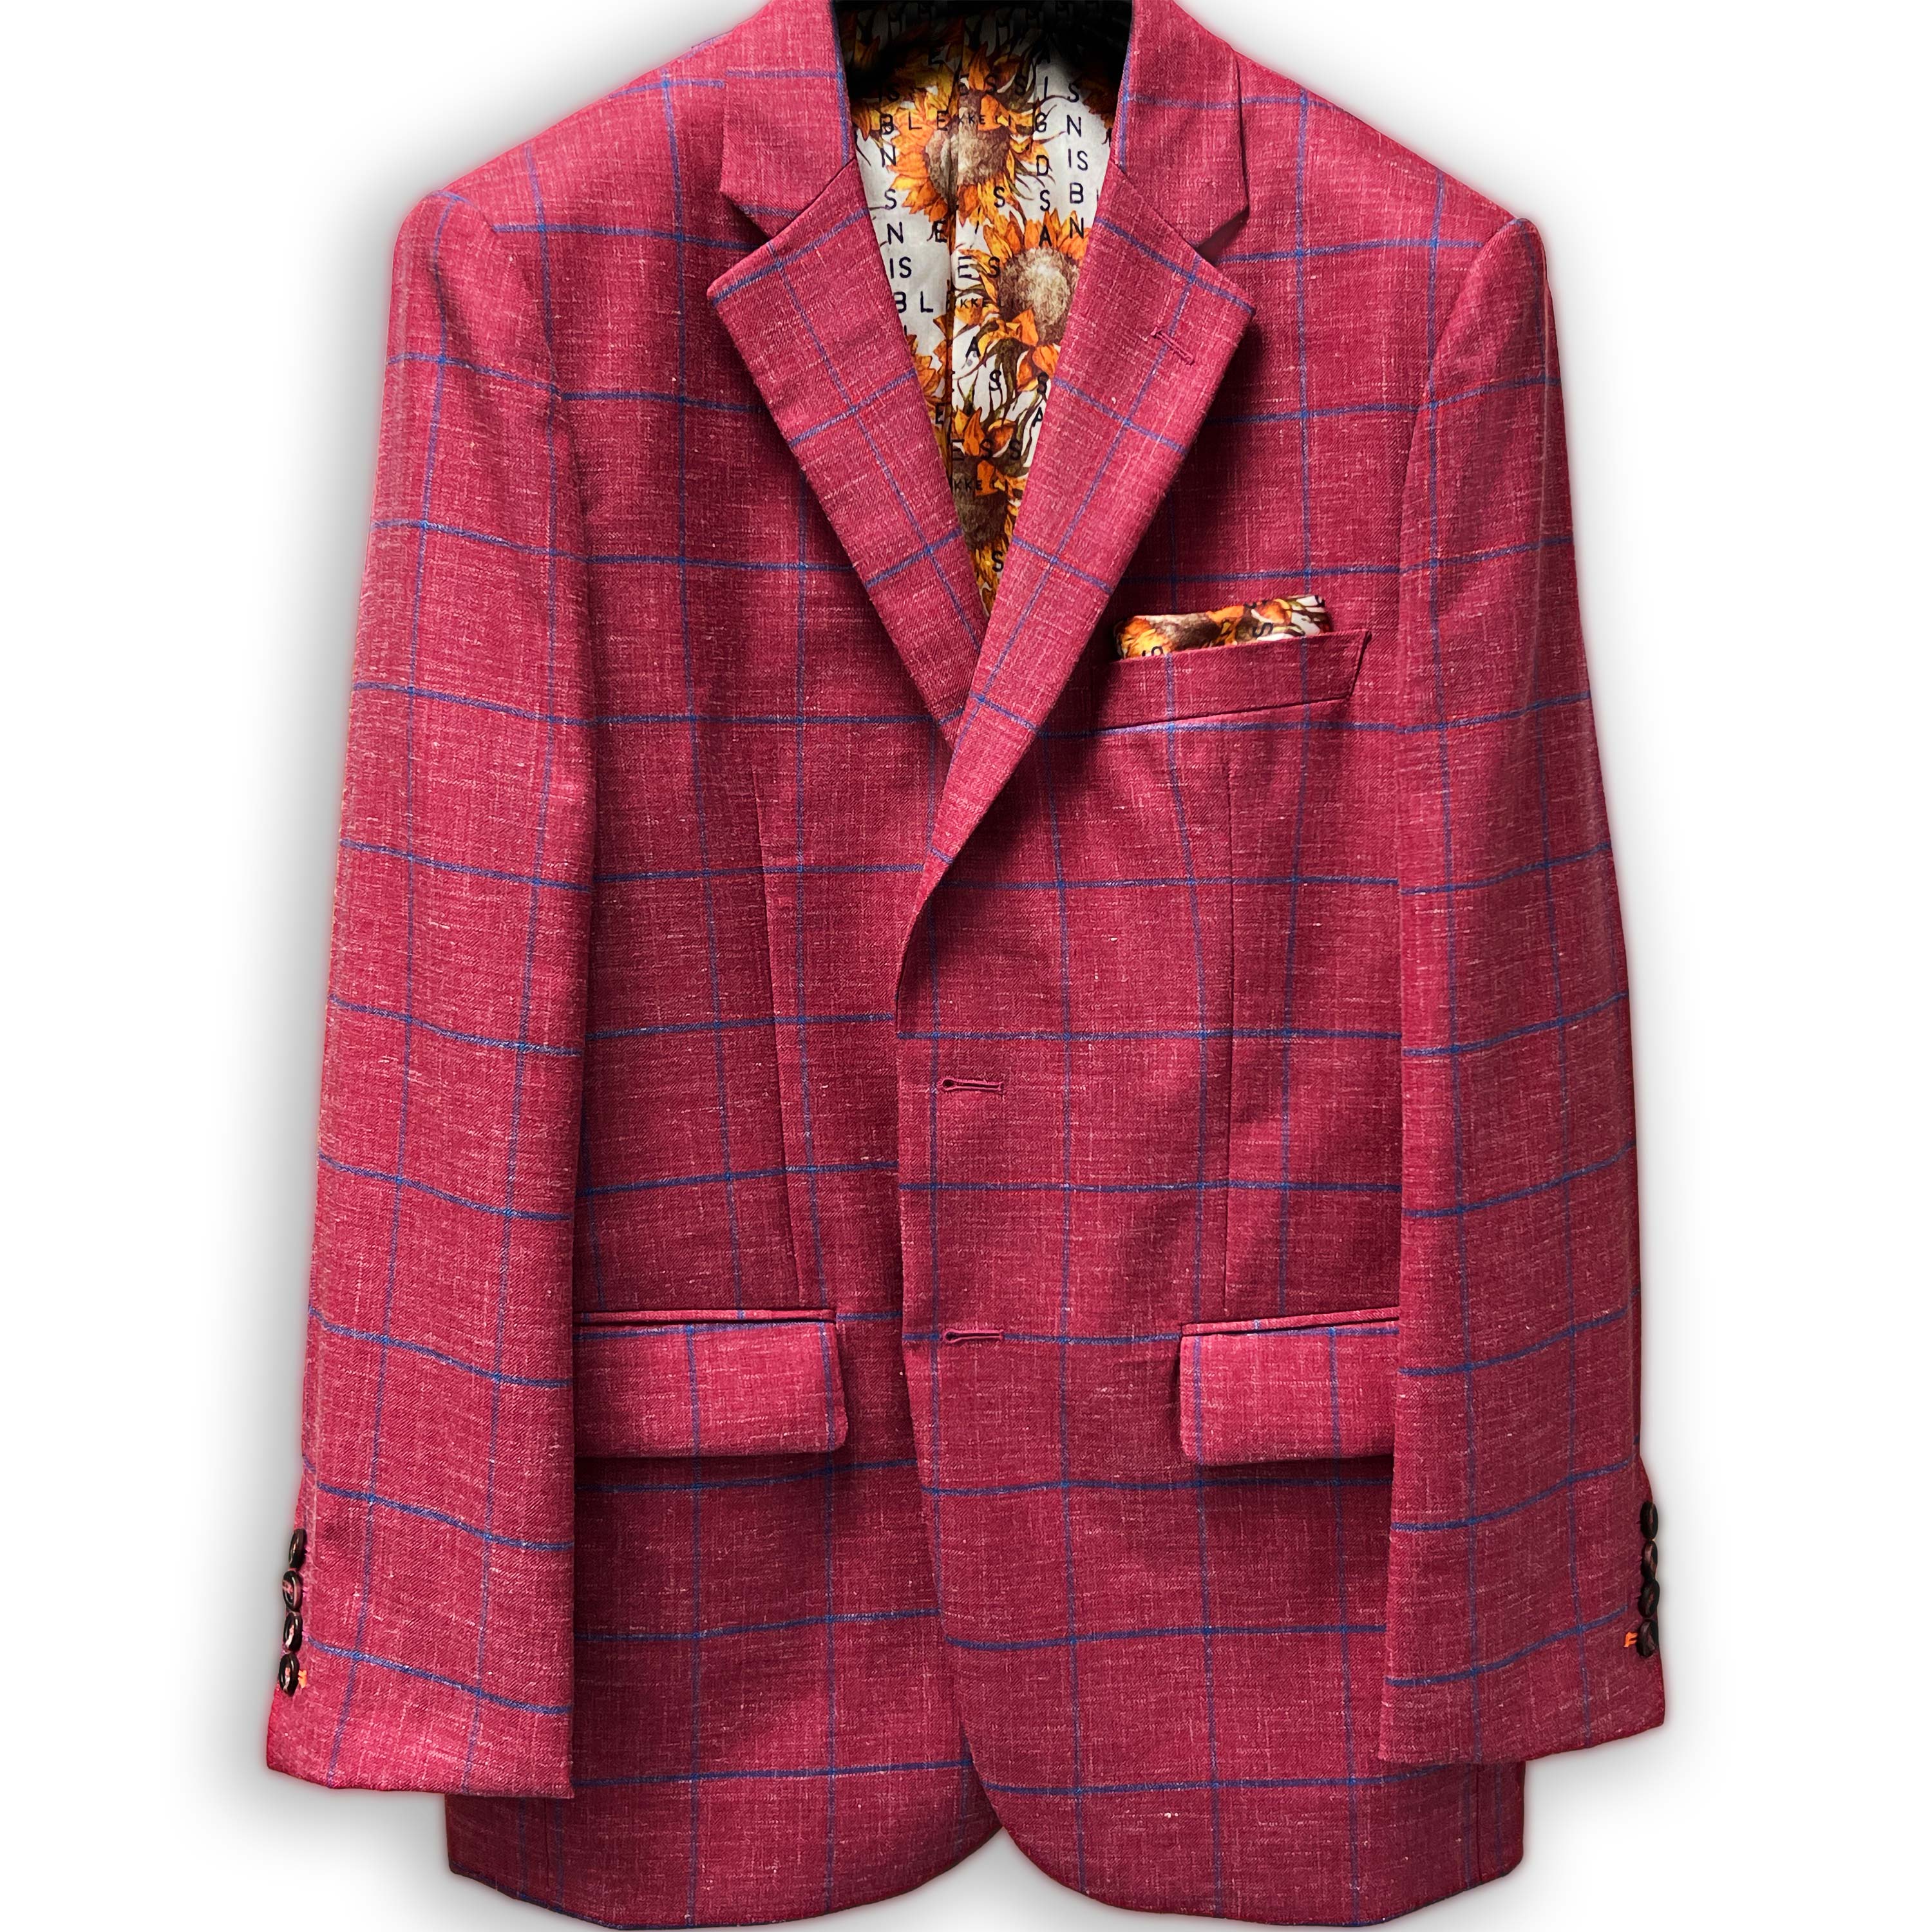 Modern suit style showcasing rust maroon sportcoat with royal blue windowpane.